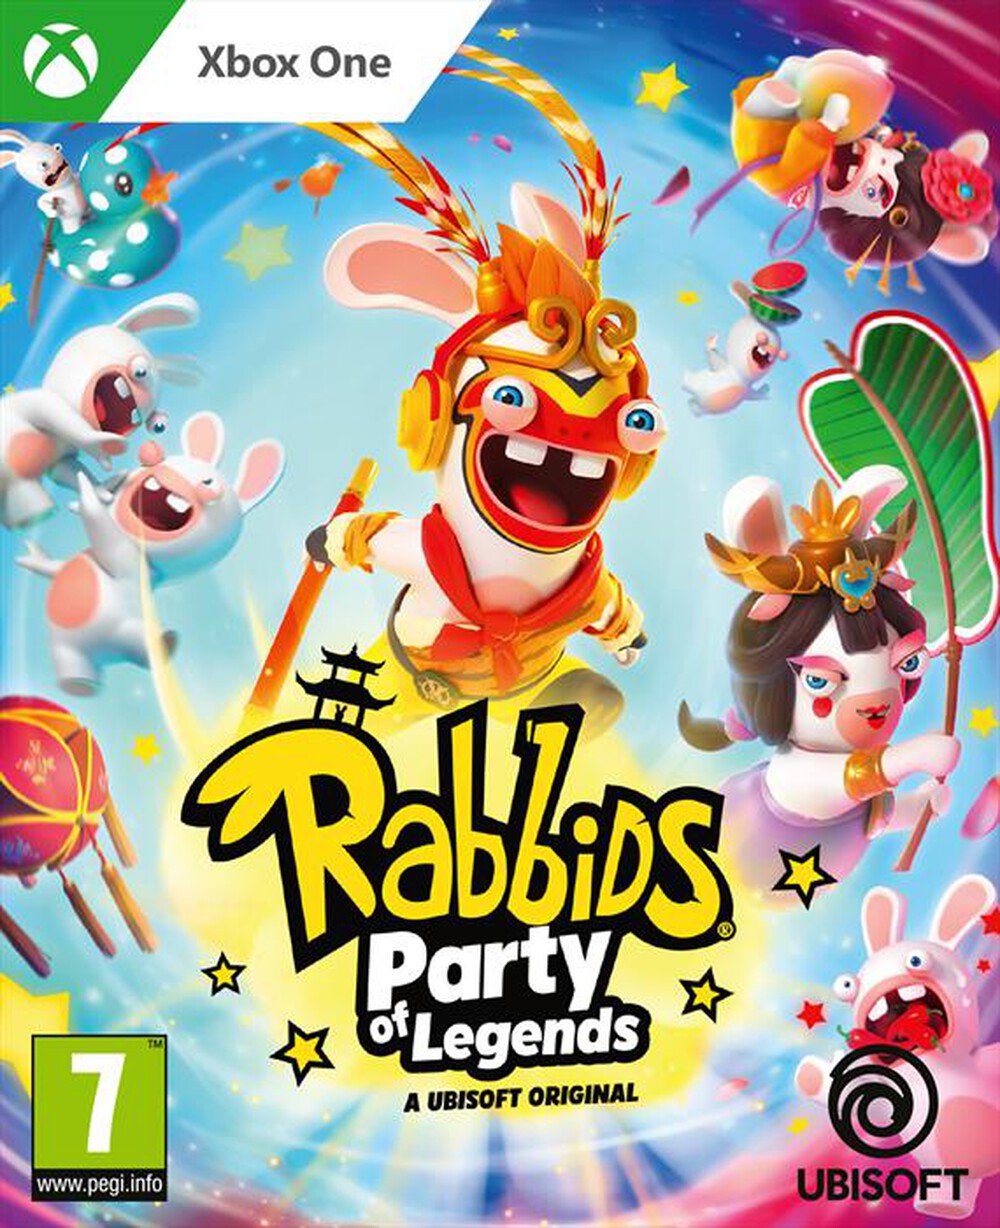 "UBISOFT - RABBIDS PARTY OF LEGENDS XBOX ONE"